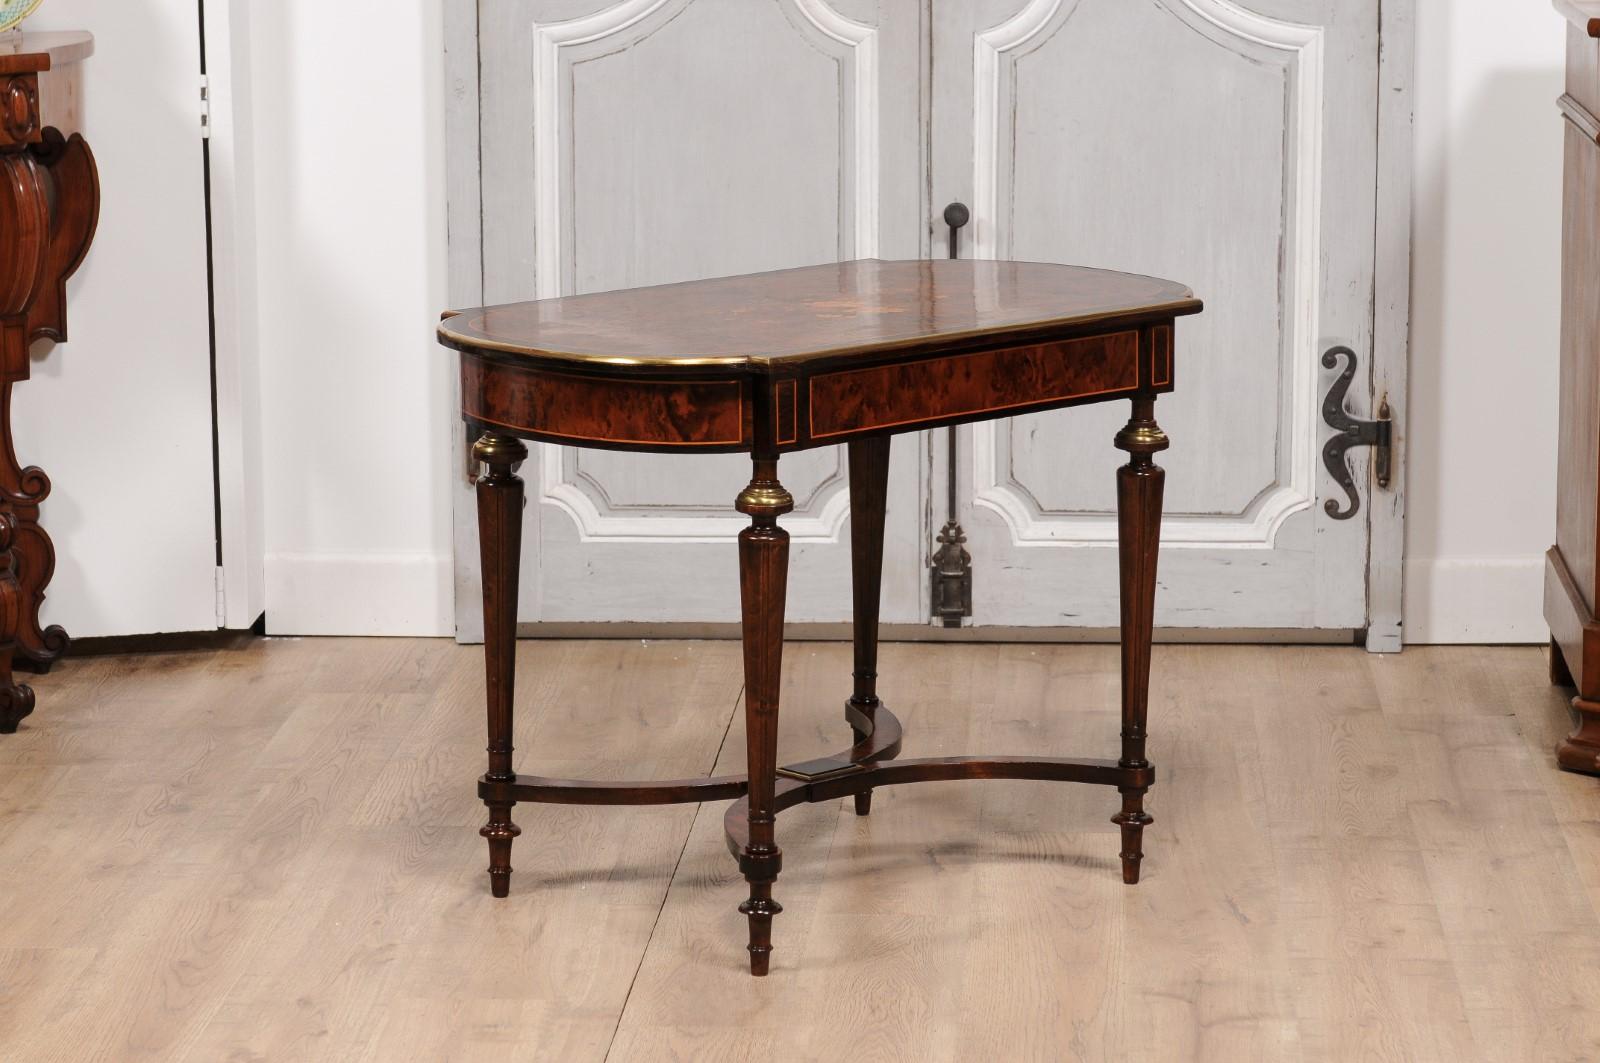 Italian 1890s Walnut, Mahogany and Brass Side Table with Floral Marquetry Décor For Sale 7